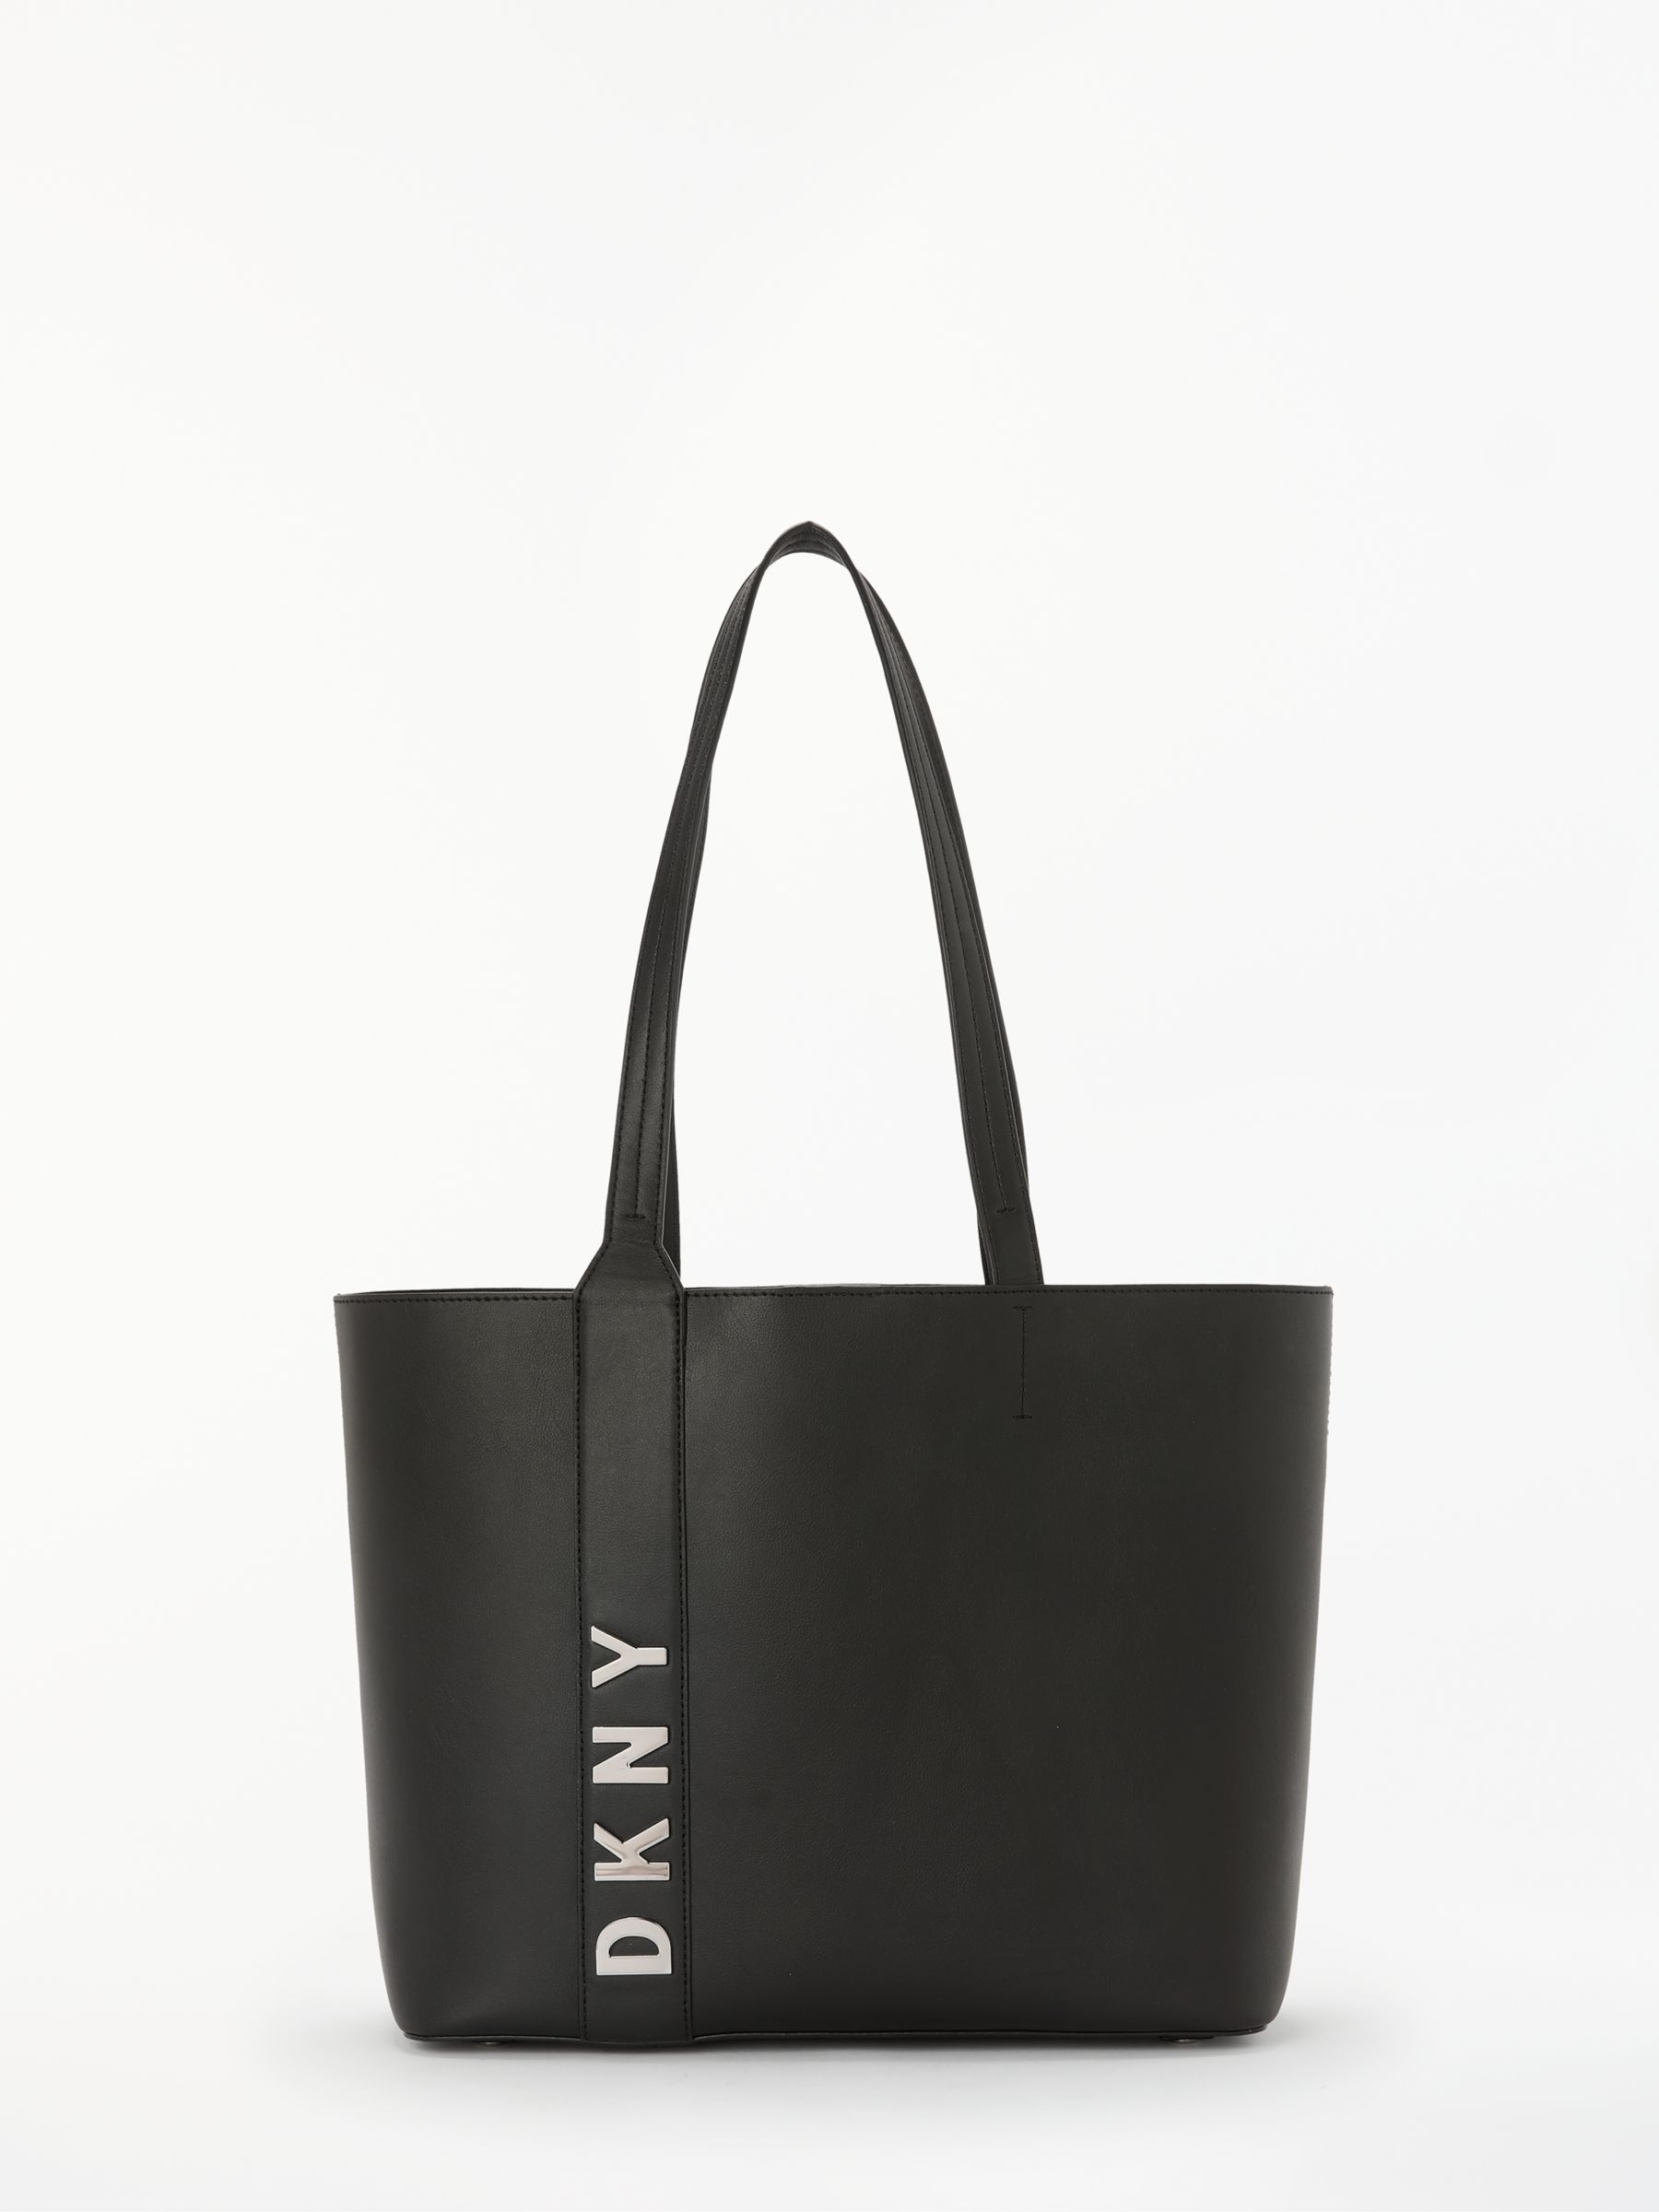 DKNY Bedford Large Leather Tote Bag 